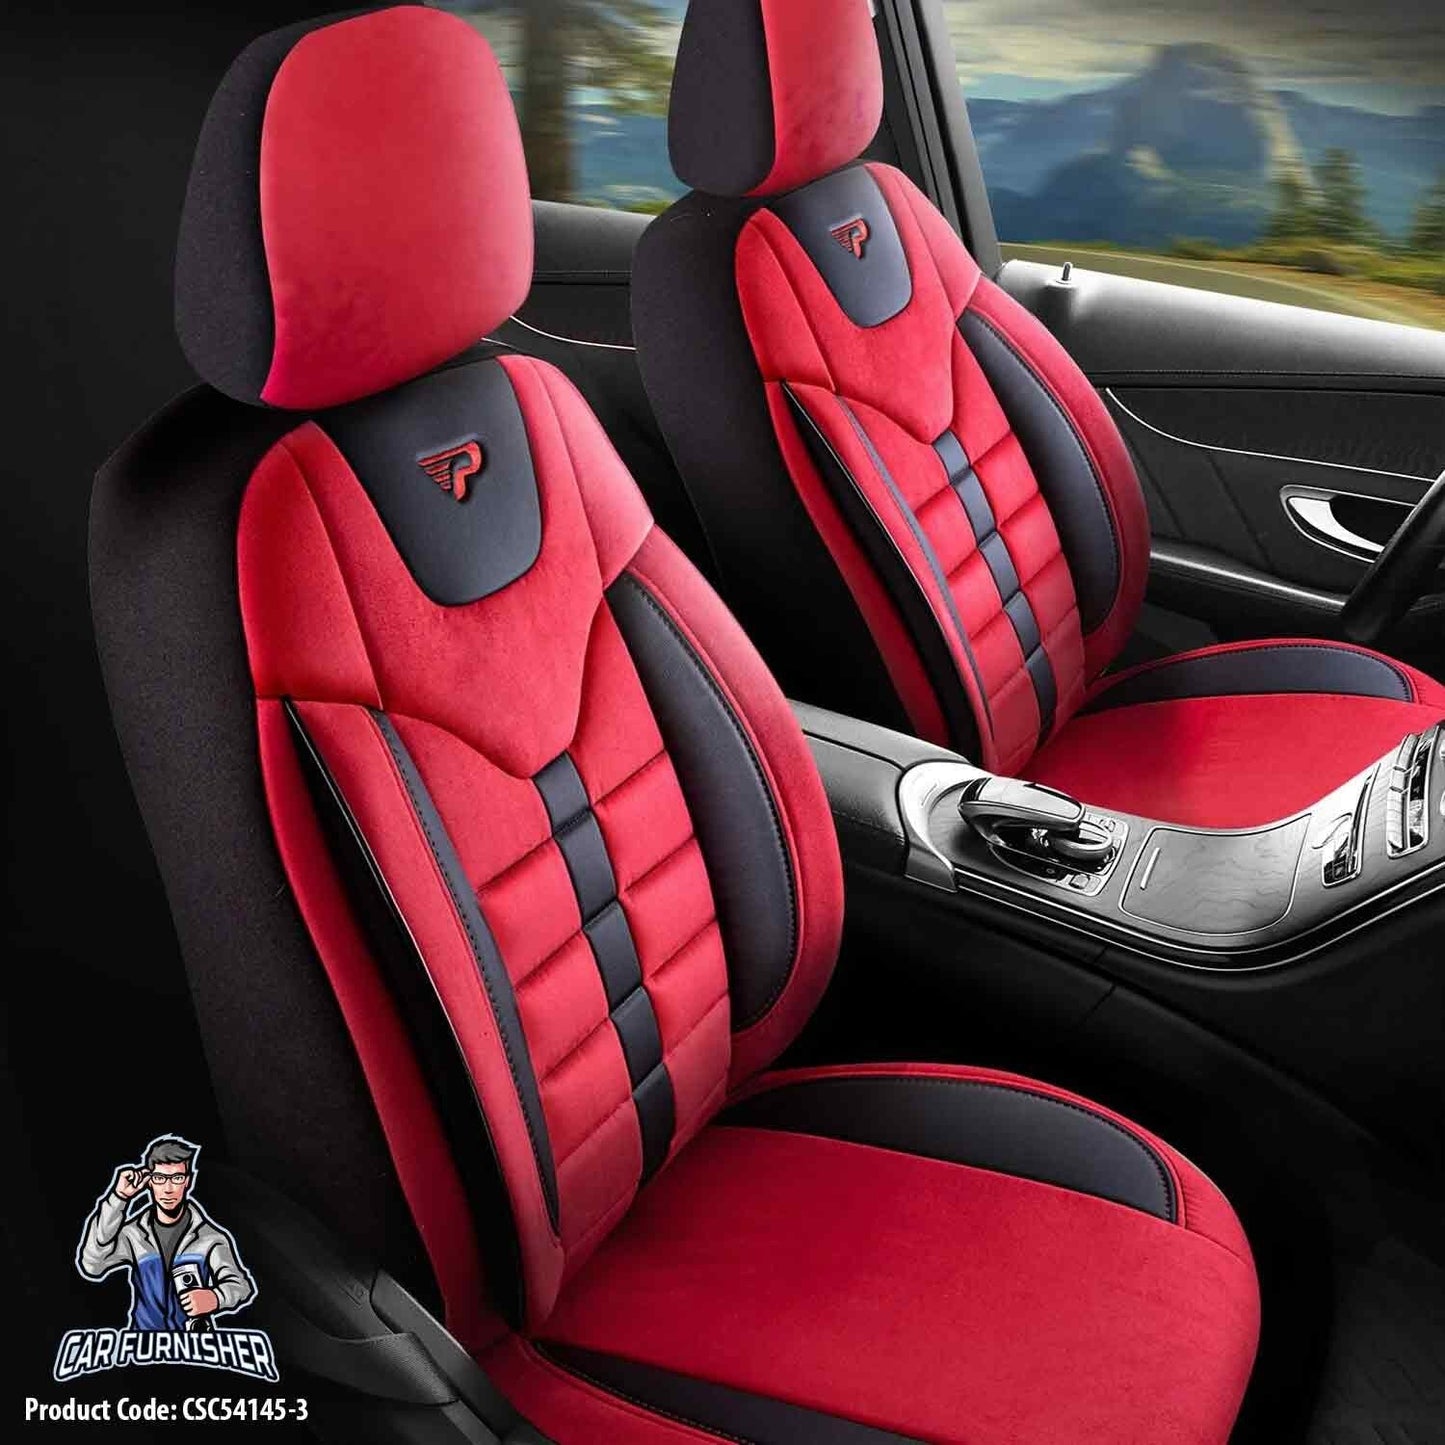 Mercedes 190 Seat Covers Toronto Design Red 5 Seats + Headrests (Full Set) Leather & Suede Fabric